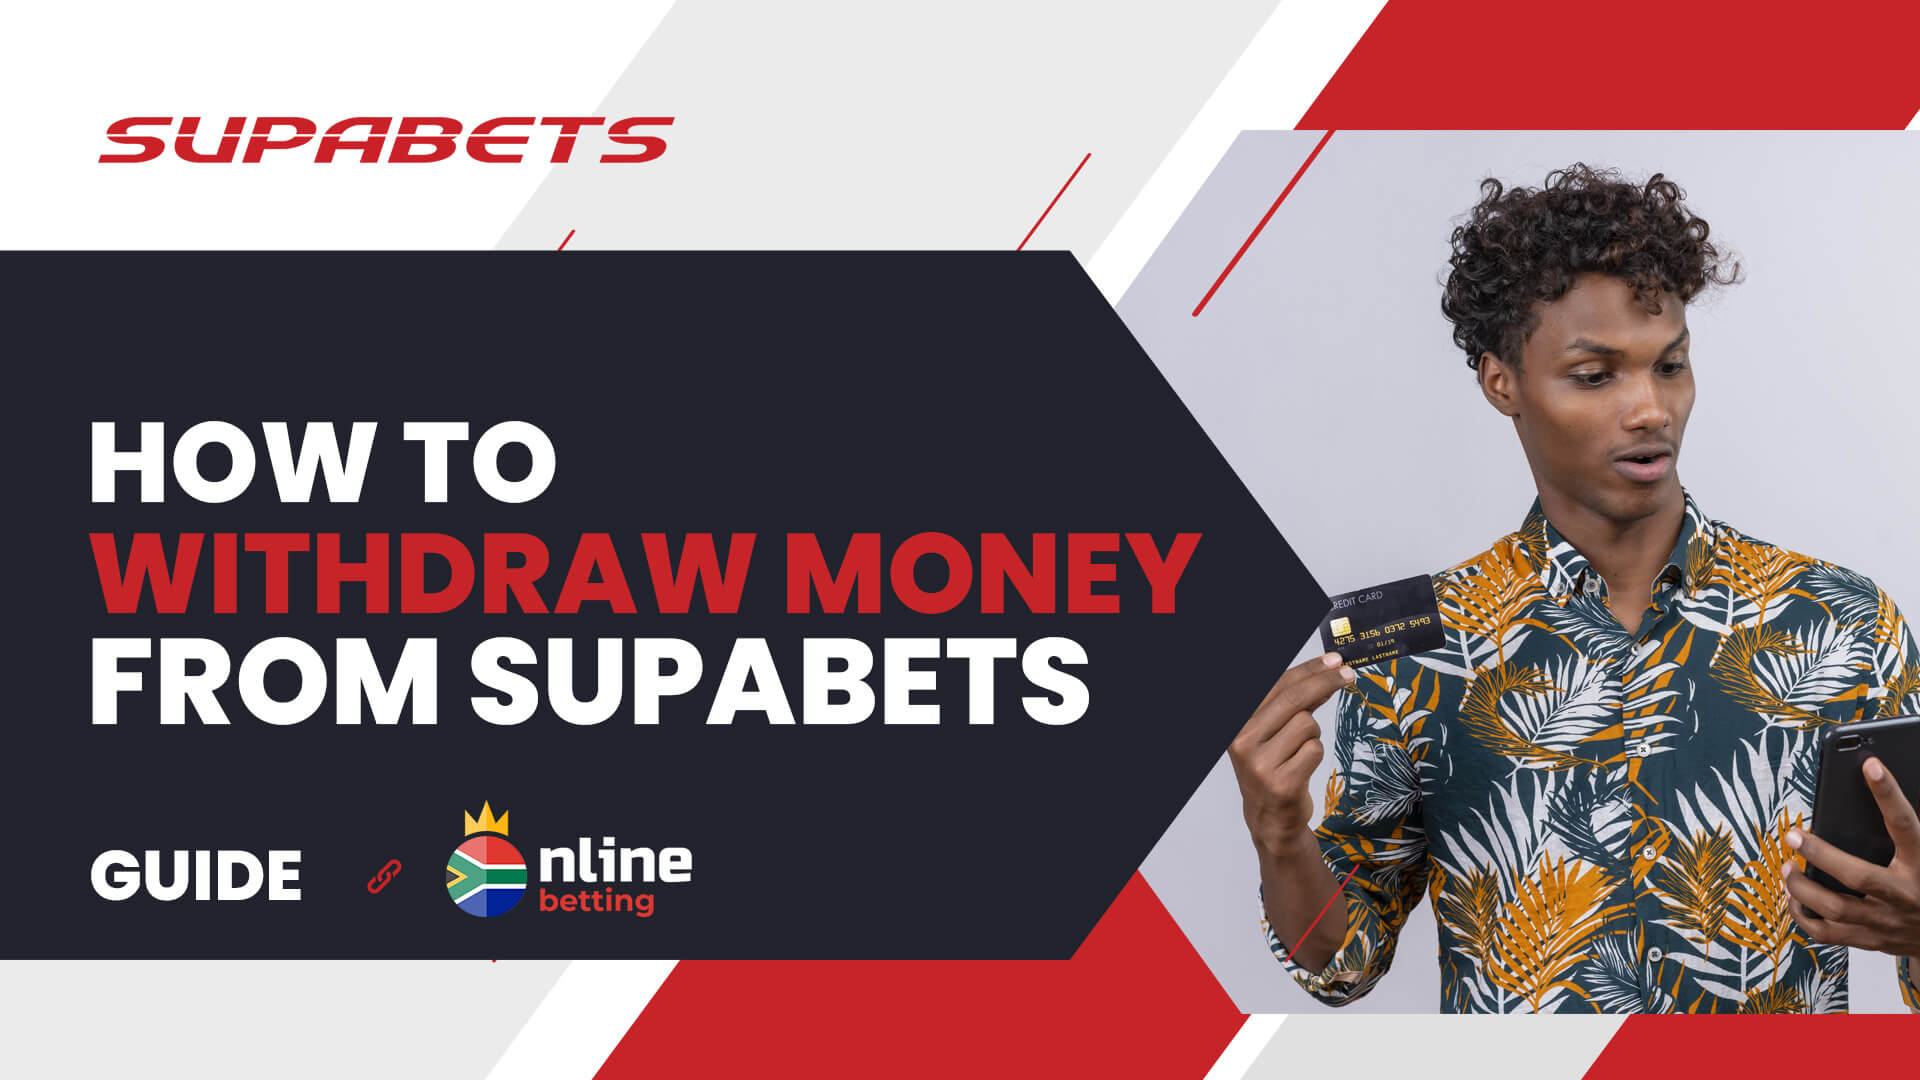 How to Withdraw Money from Supabets